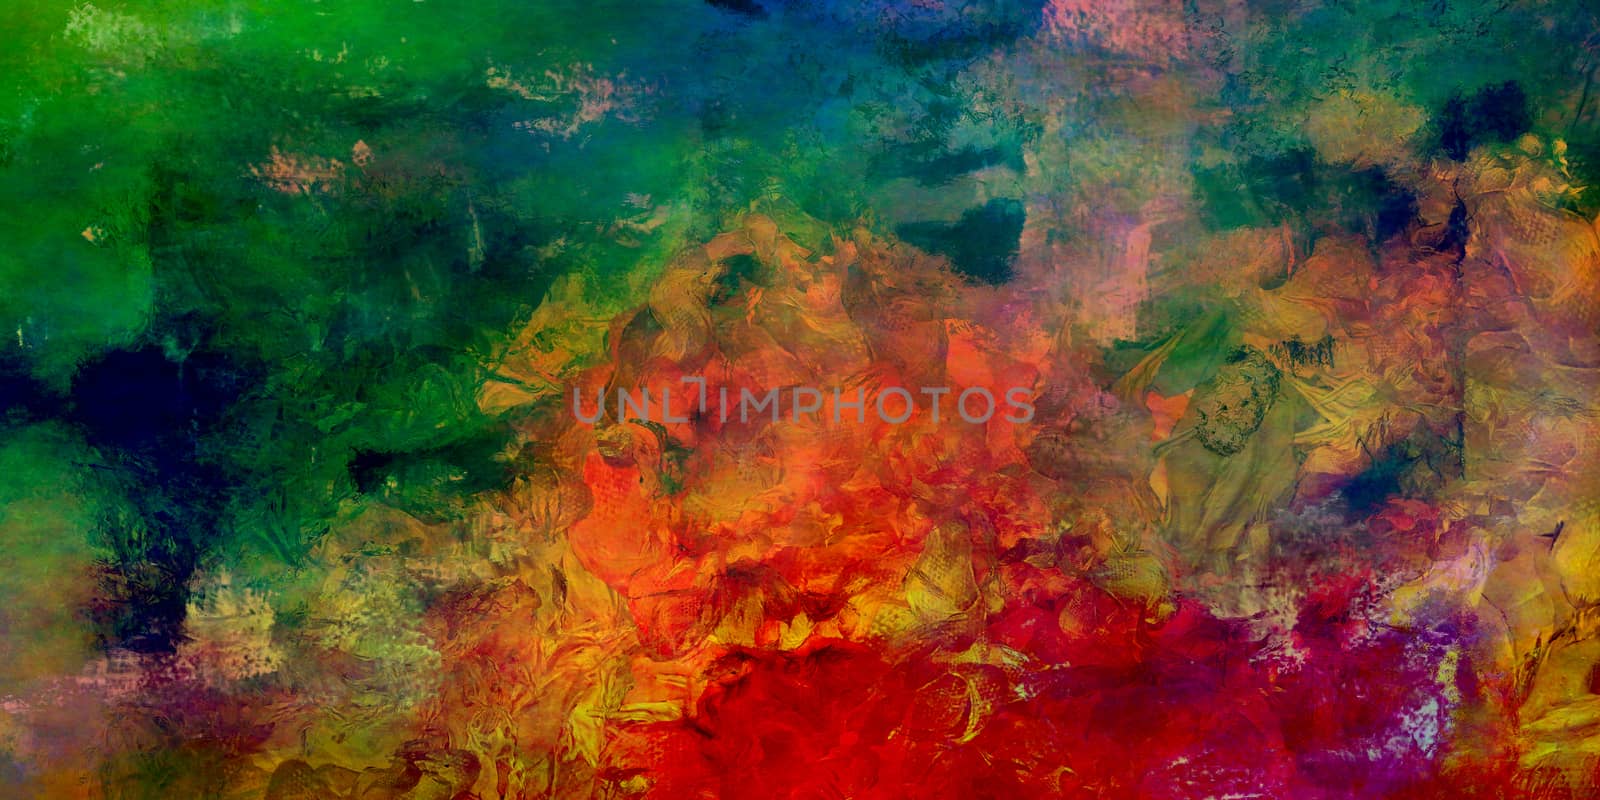 Abstract Painting in Vivid Colors. Artwork for creative graphic design